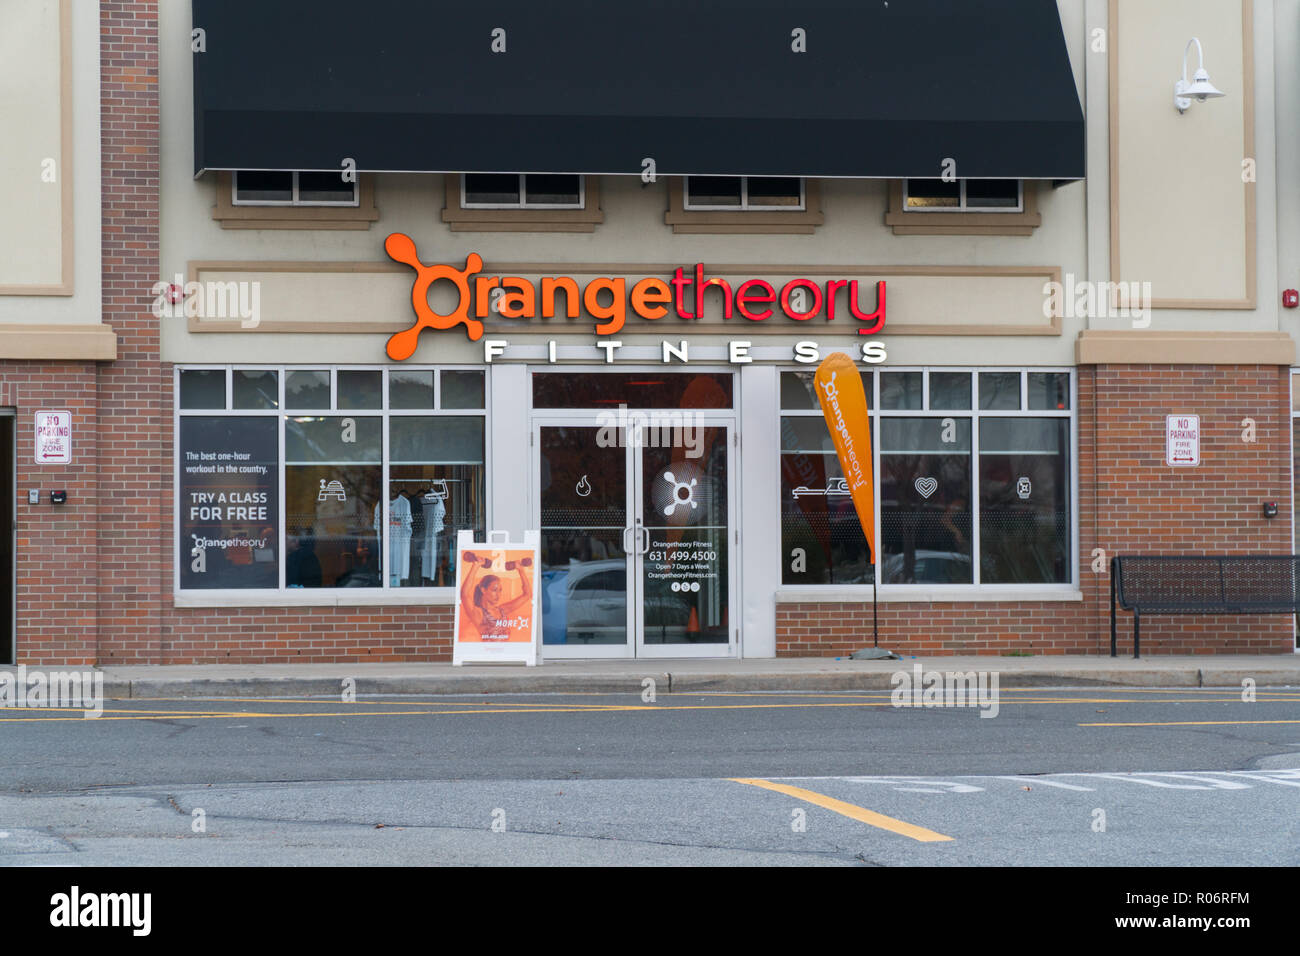 https://c8.alamy.com/comp/R06RFM/new-york-usa-circa-2018-orange-theory-fitness-exterior-gym-studio-store-front-franchise-facade-and-sign-view-from-parking-lot-heart-rate-interva-R06RFM.jpg